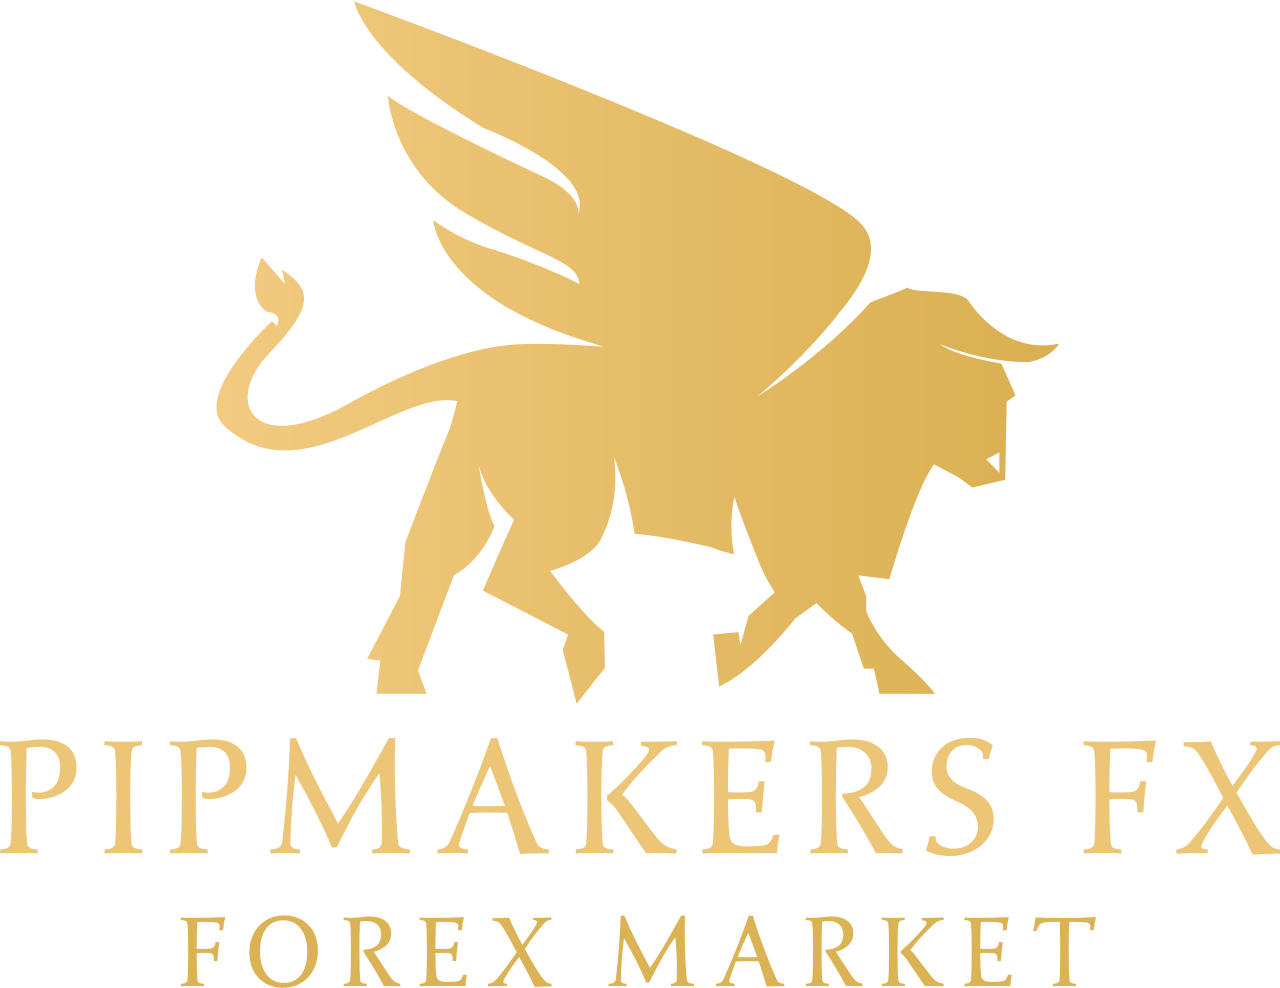 PipMakers FX's web page